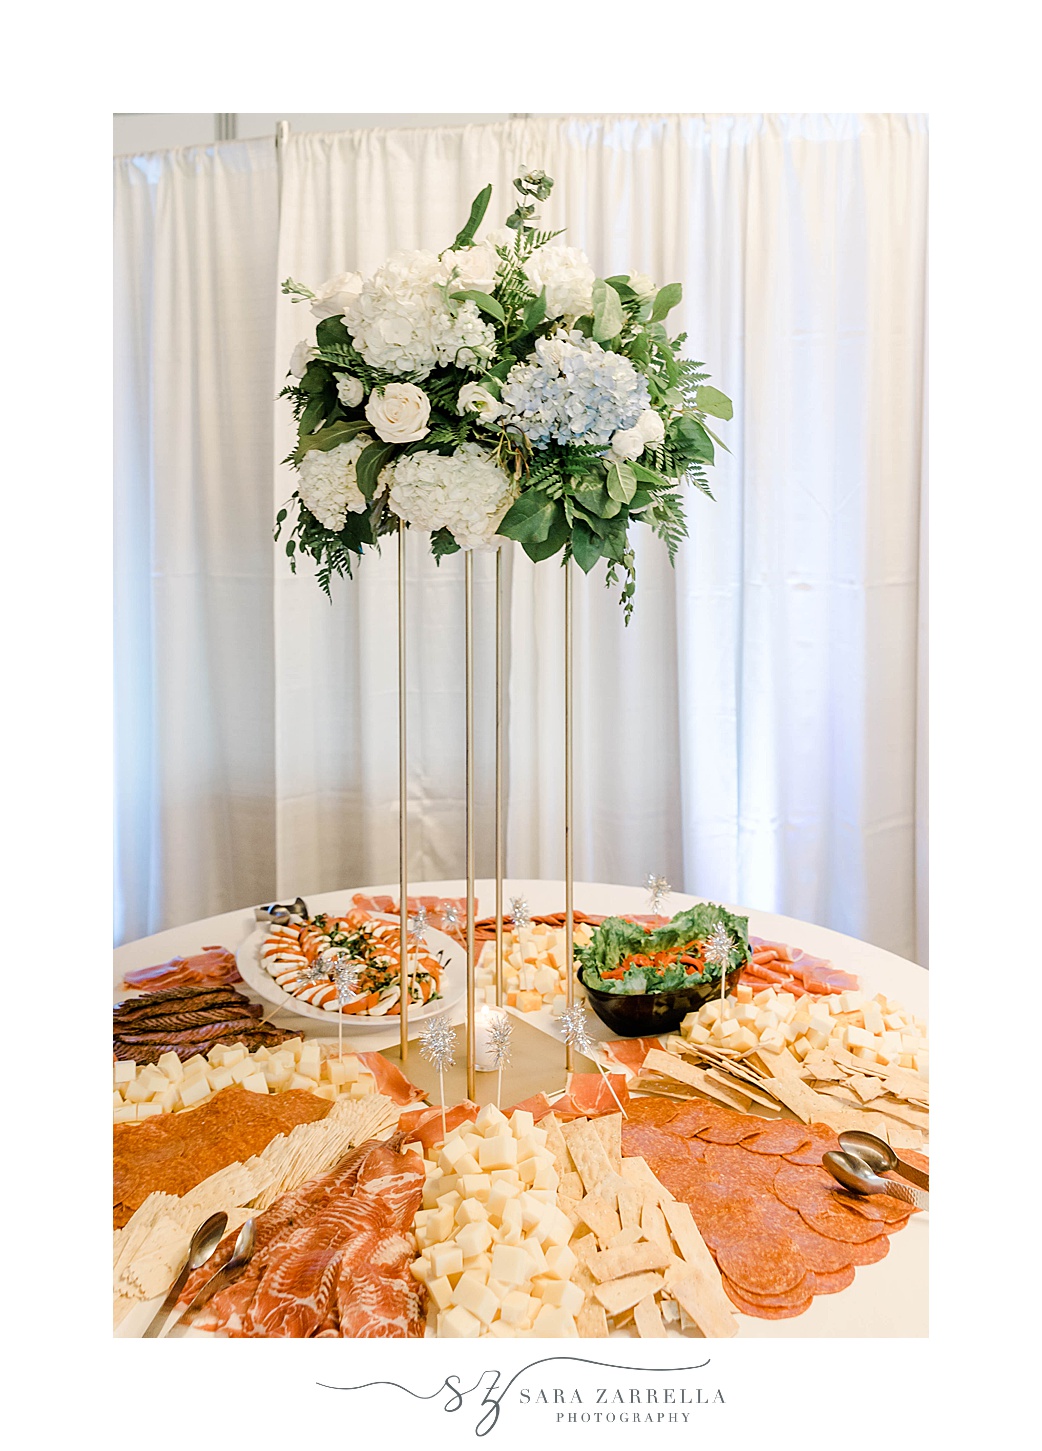 tall floral centerpiece sits on table with lunchmeat and appetizers at Kirkbrae Country Club